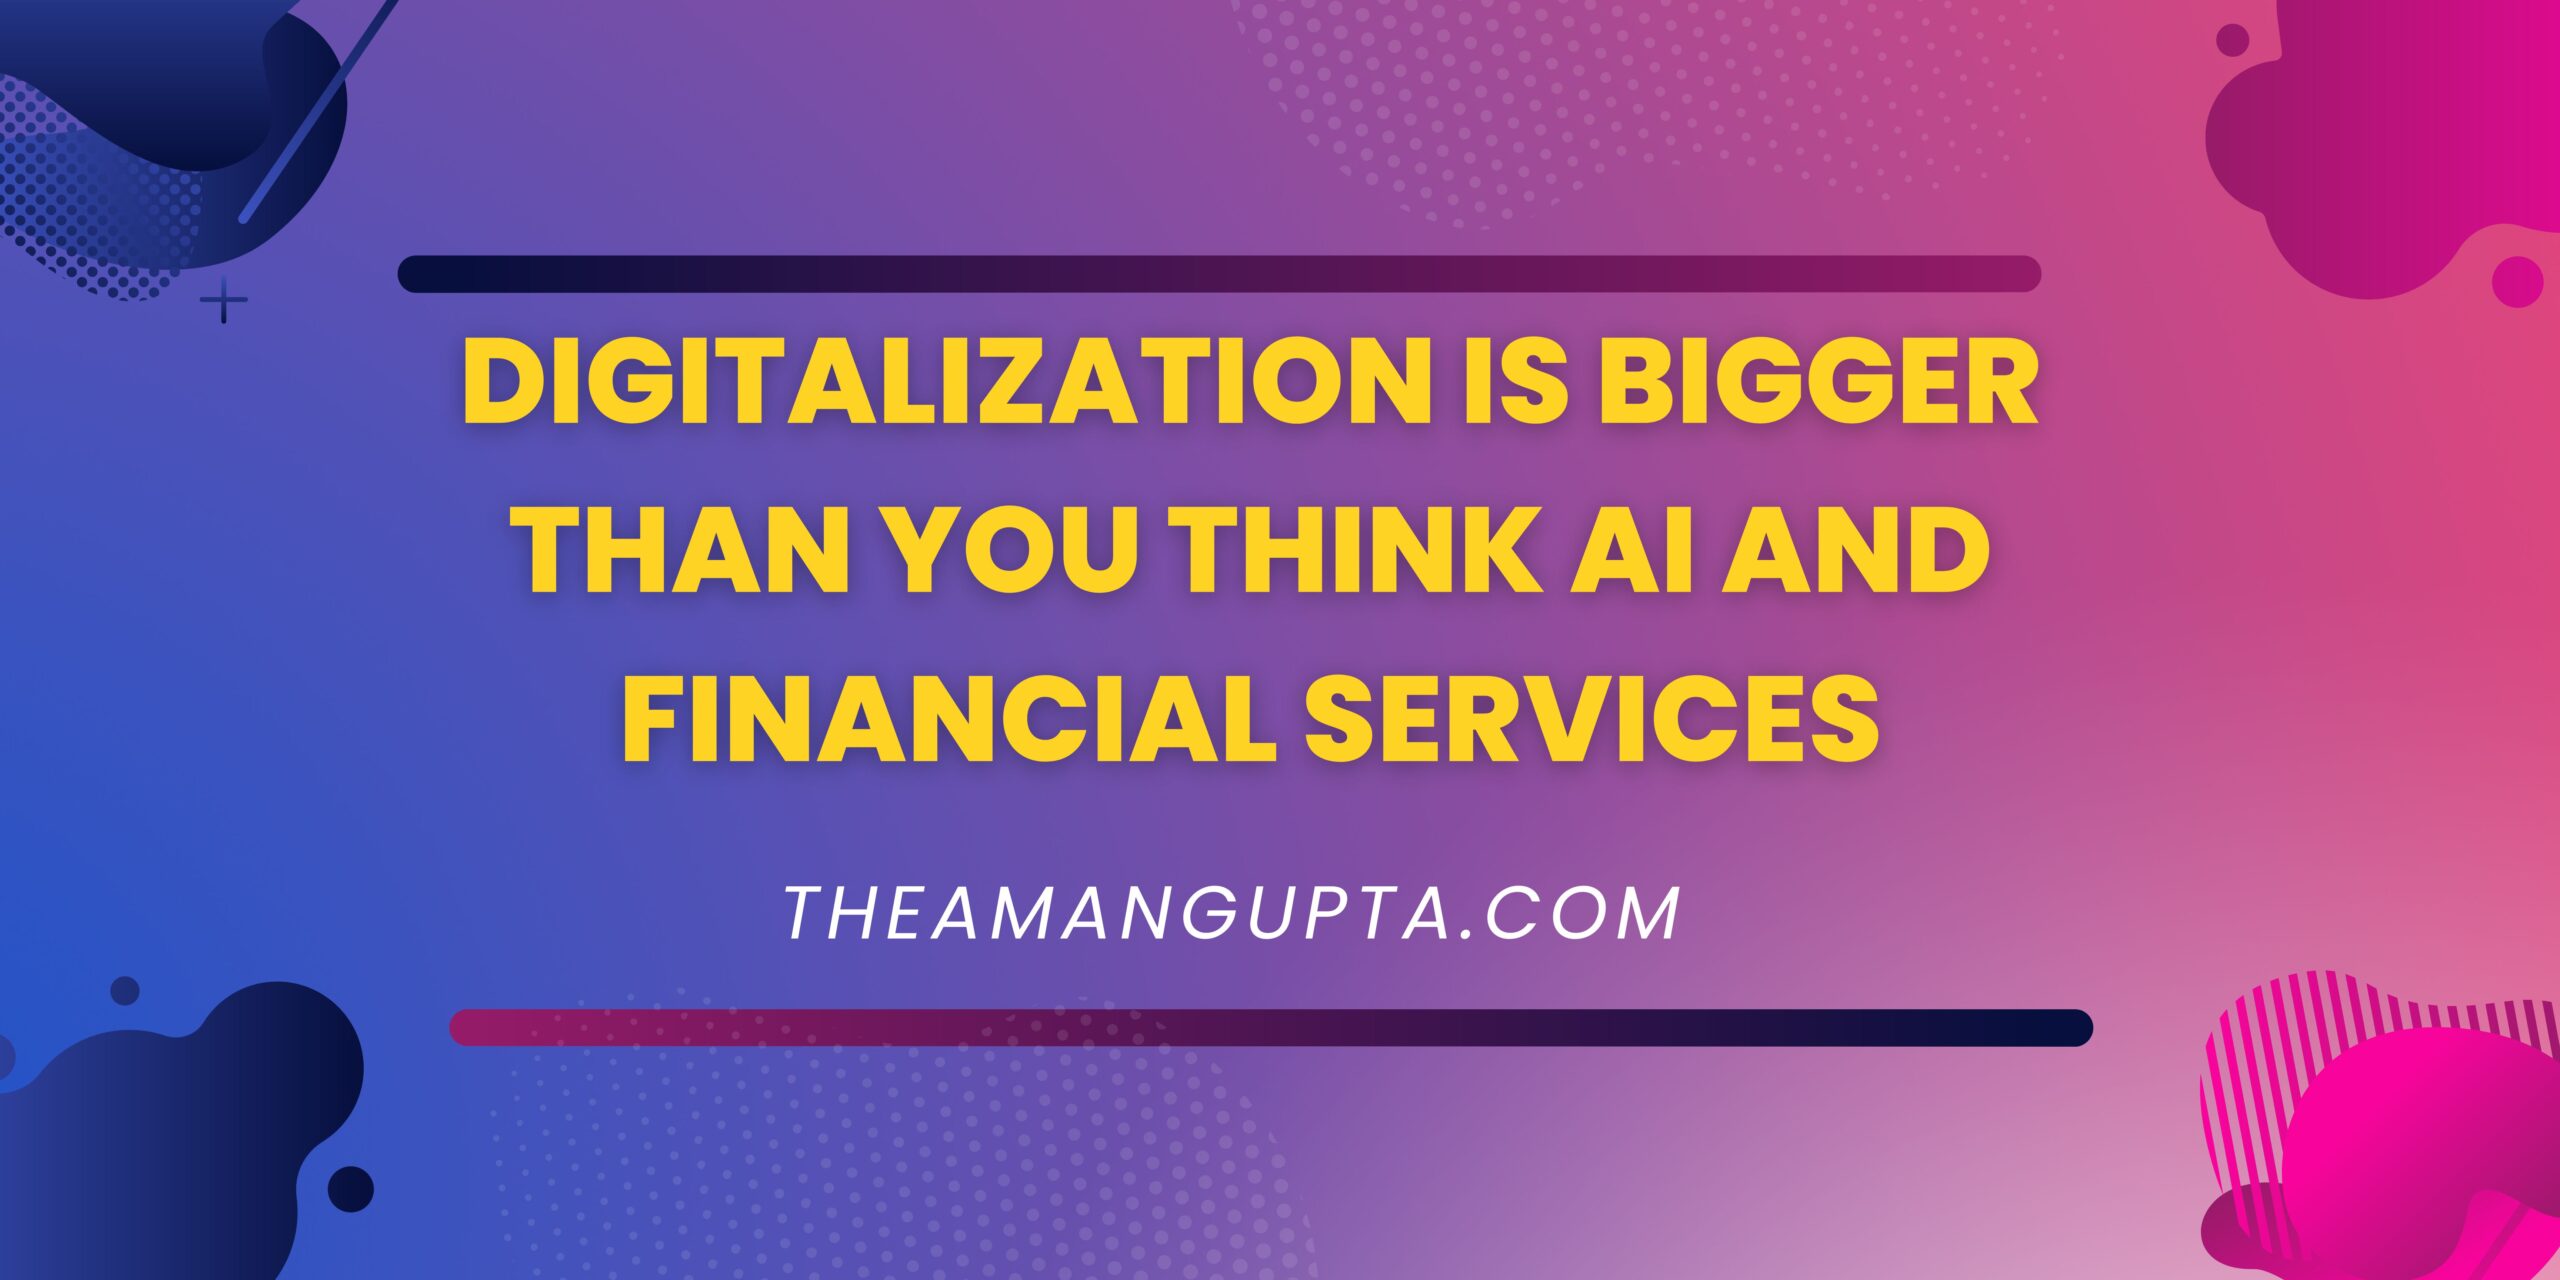 Digitalization Is Bigger Than You Think AI And Financial Services|Financial Services|Theamangupta|Theamangupta